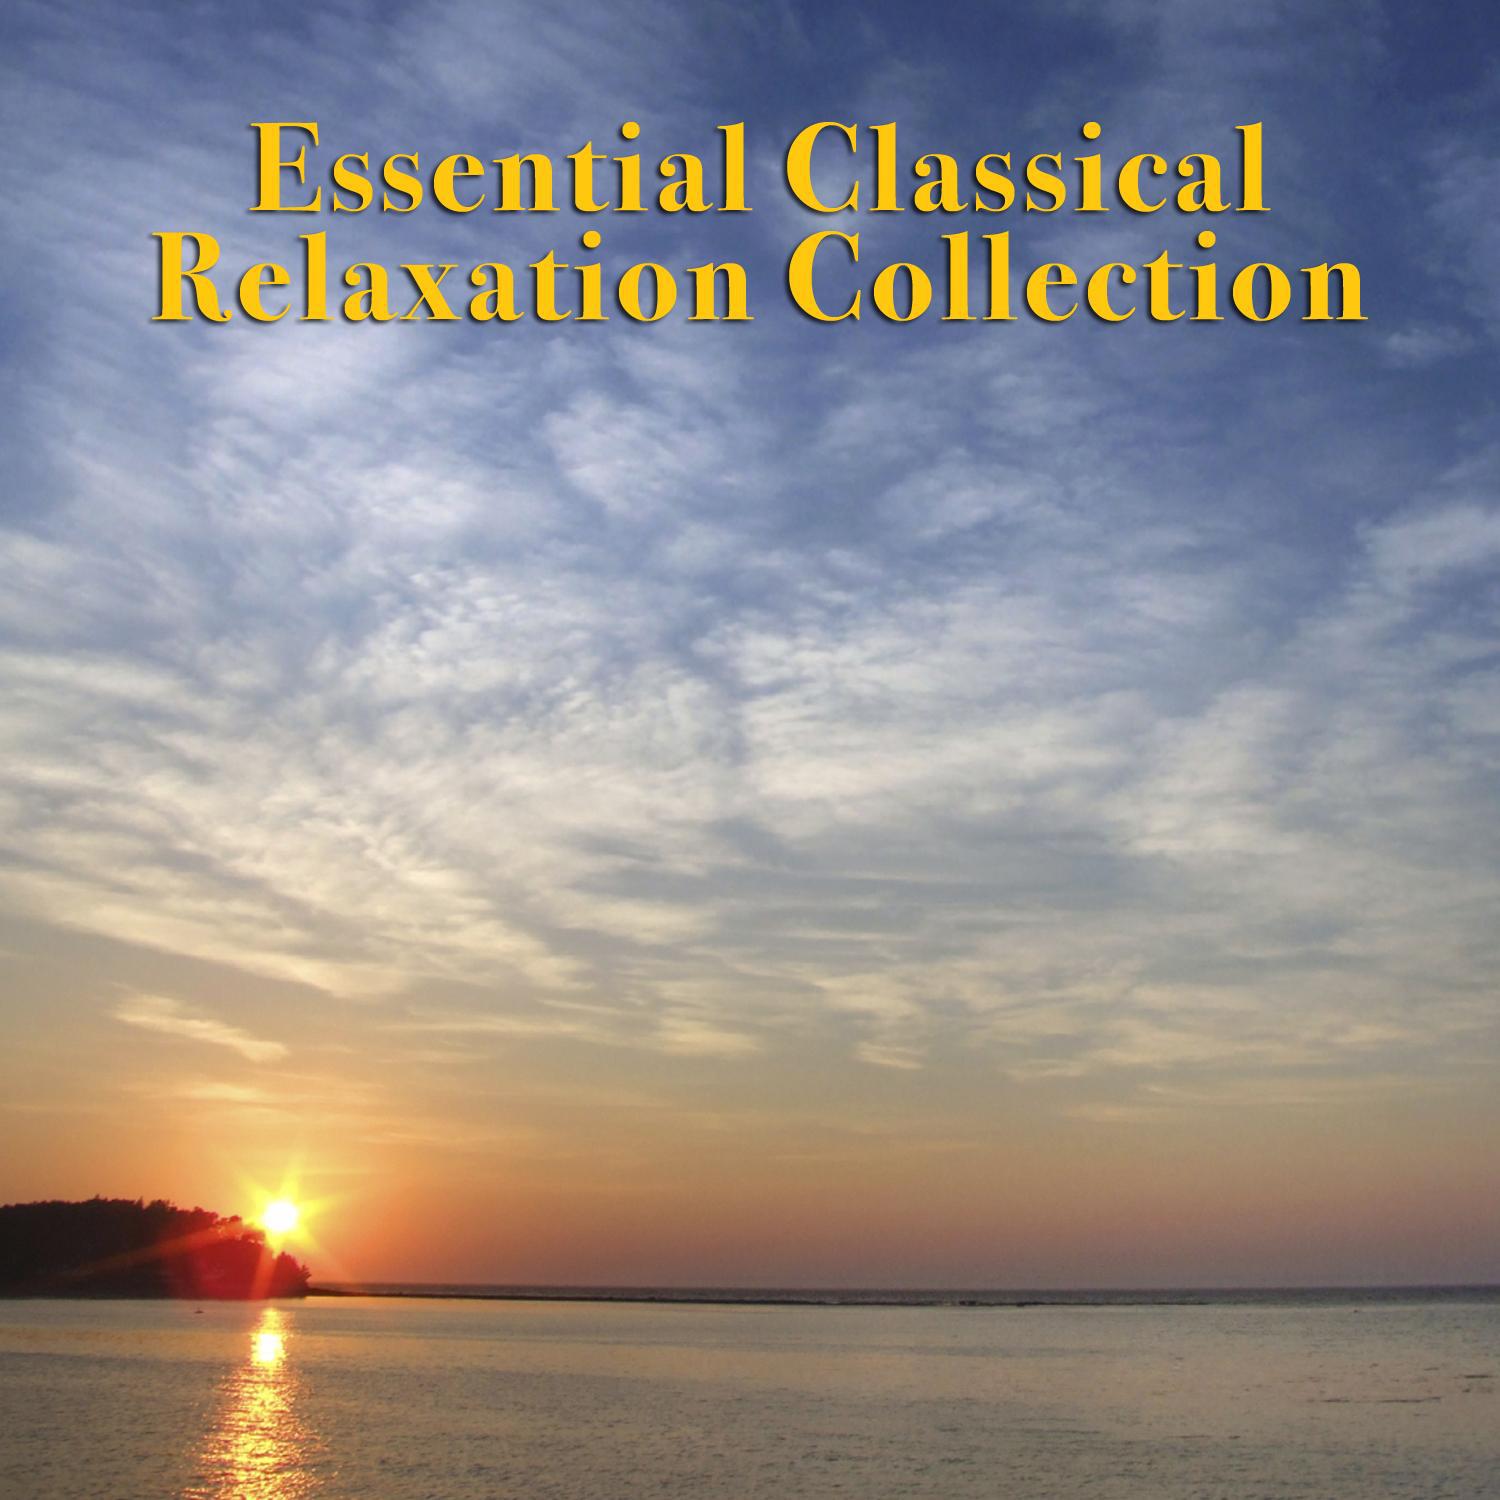 Essential Classical Relaxation Collection